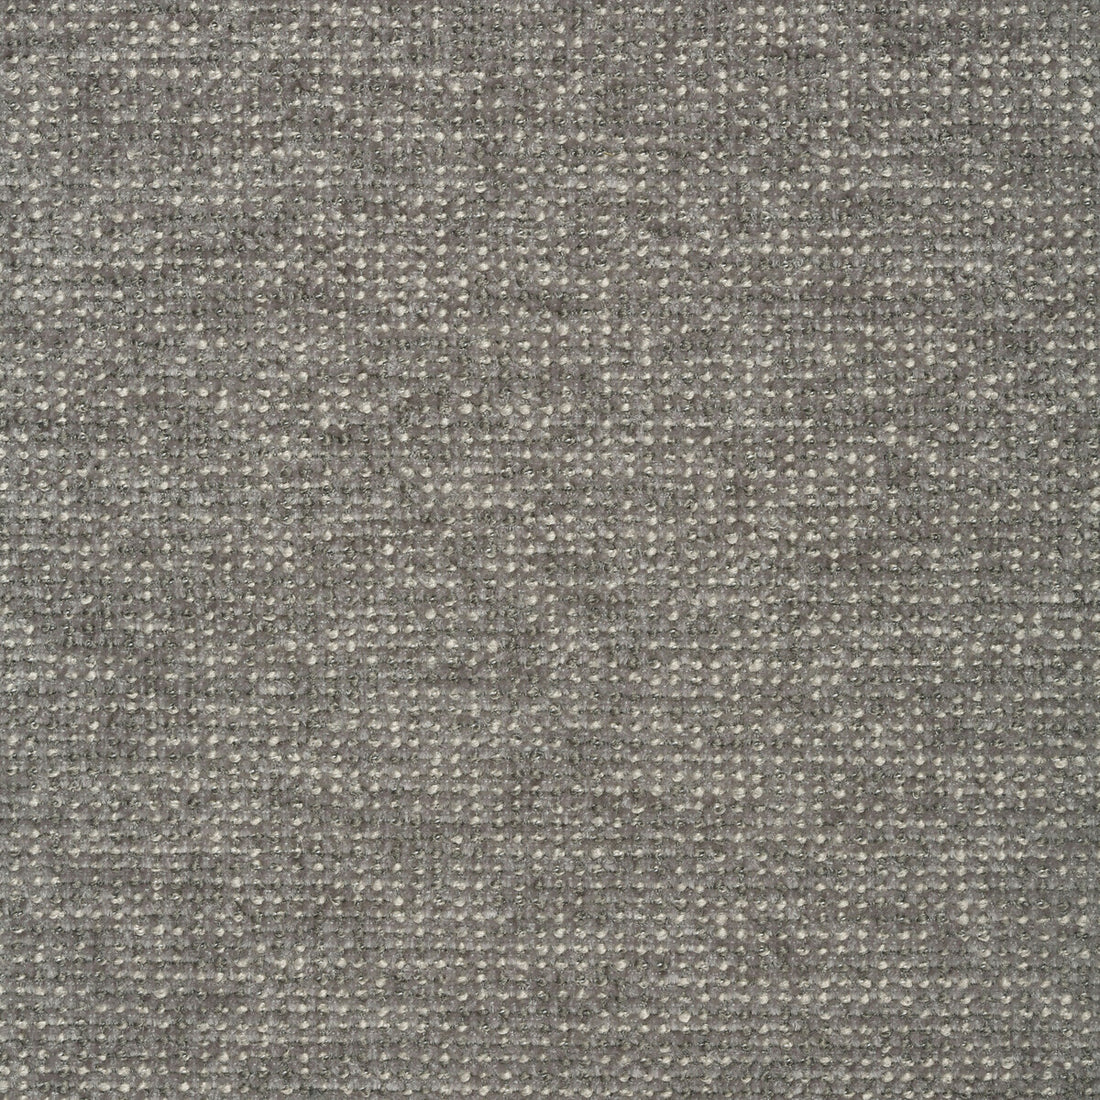 Kravet Smart fabric in 35115-11 color - pattern 35115.11.0 - by Kravet Smart in the Crypton Home collection